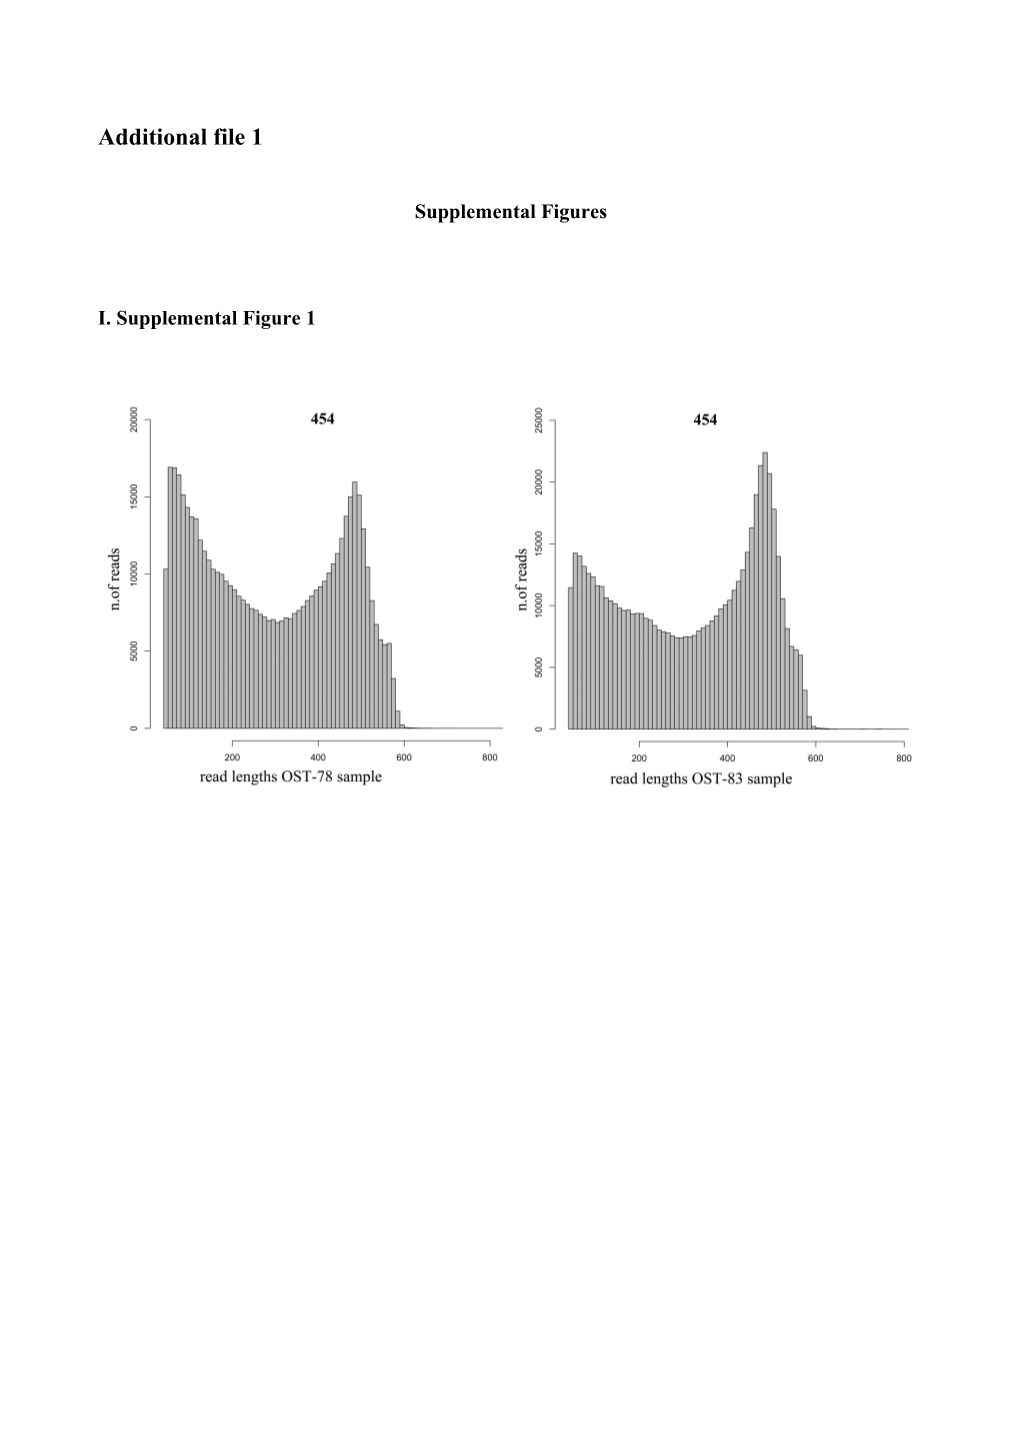 Supplemental Figure 1: Reads Length Distribution Within the Two OST Samples